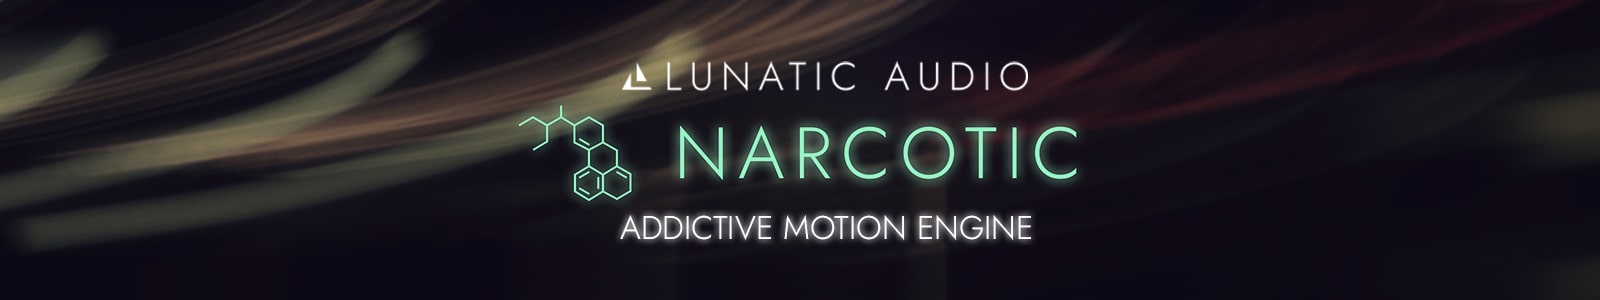 NARCOTIC by lunatic audio